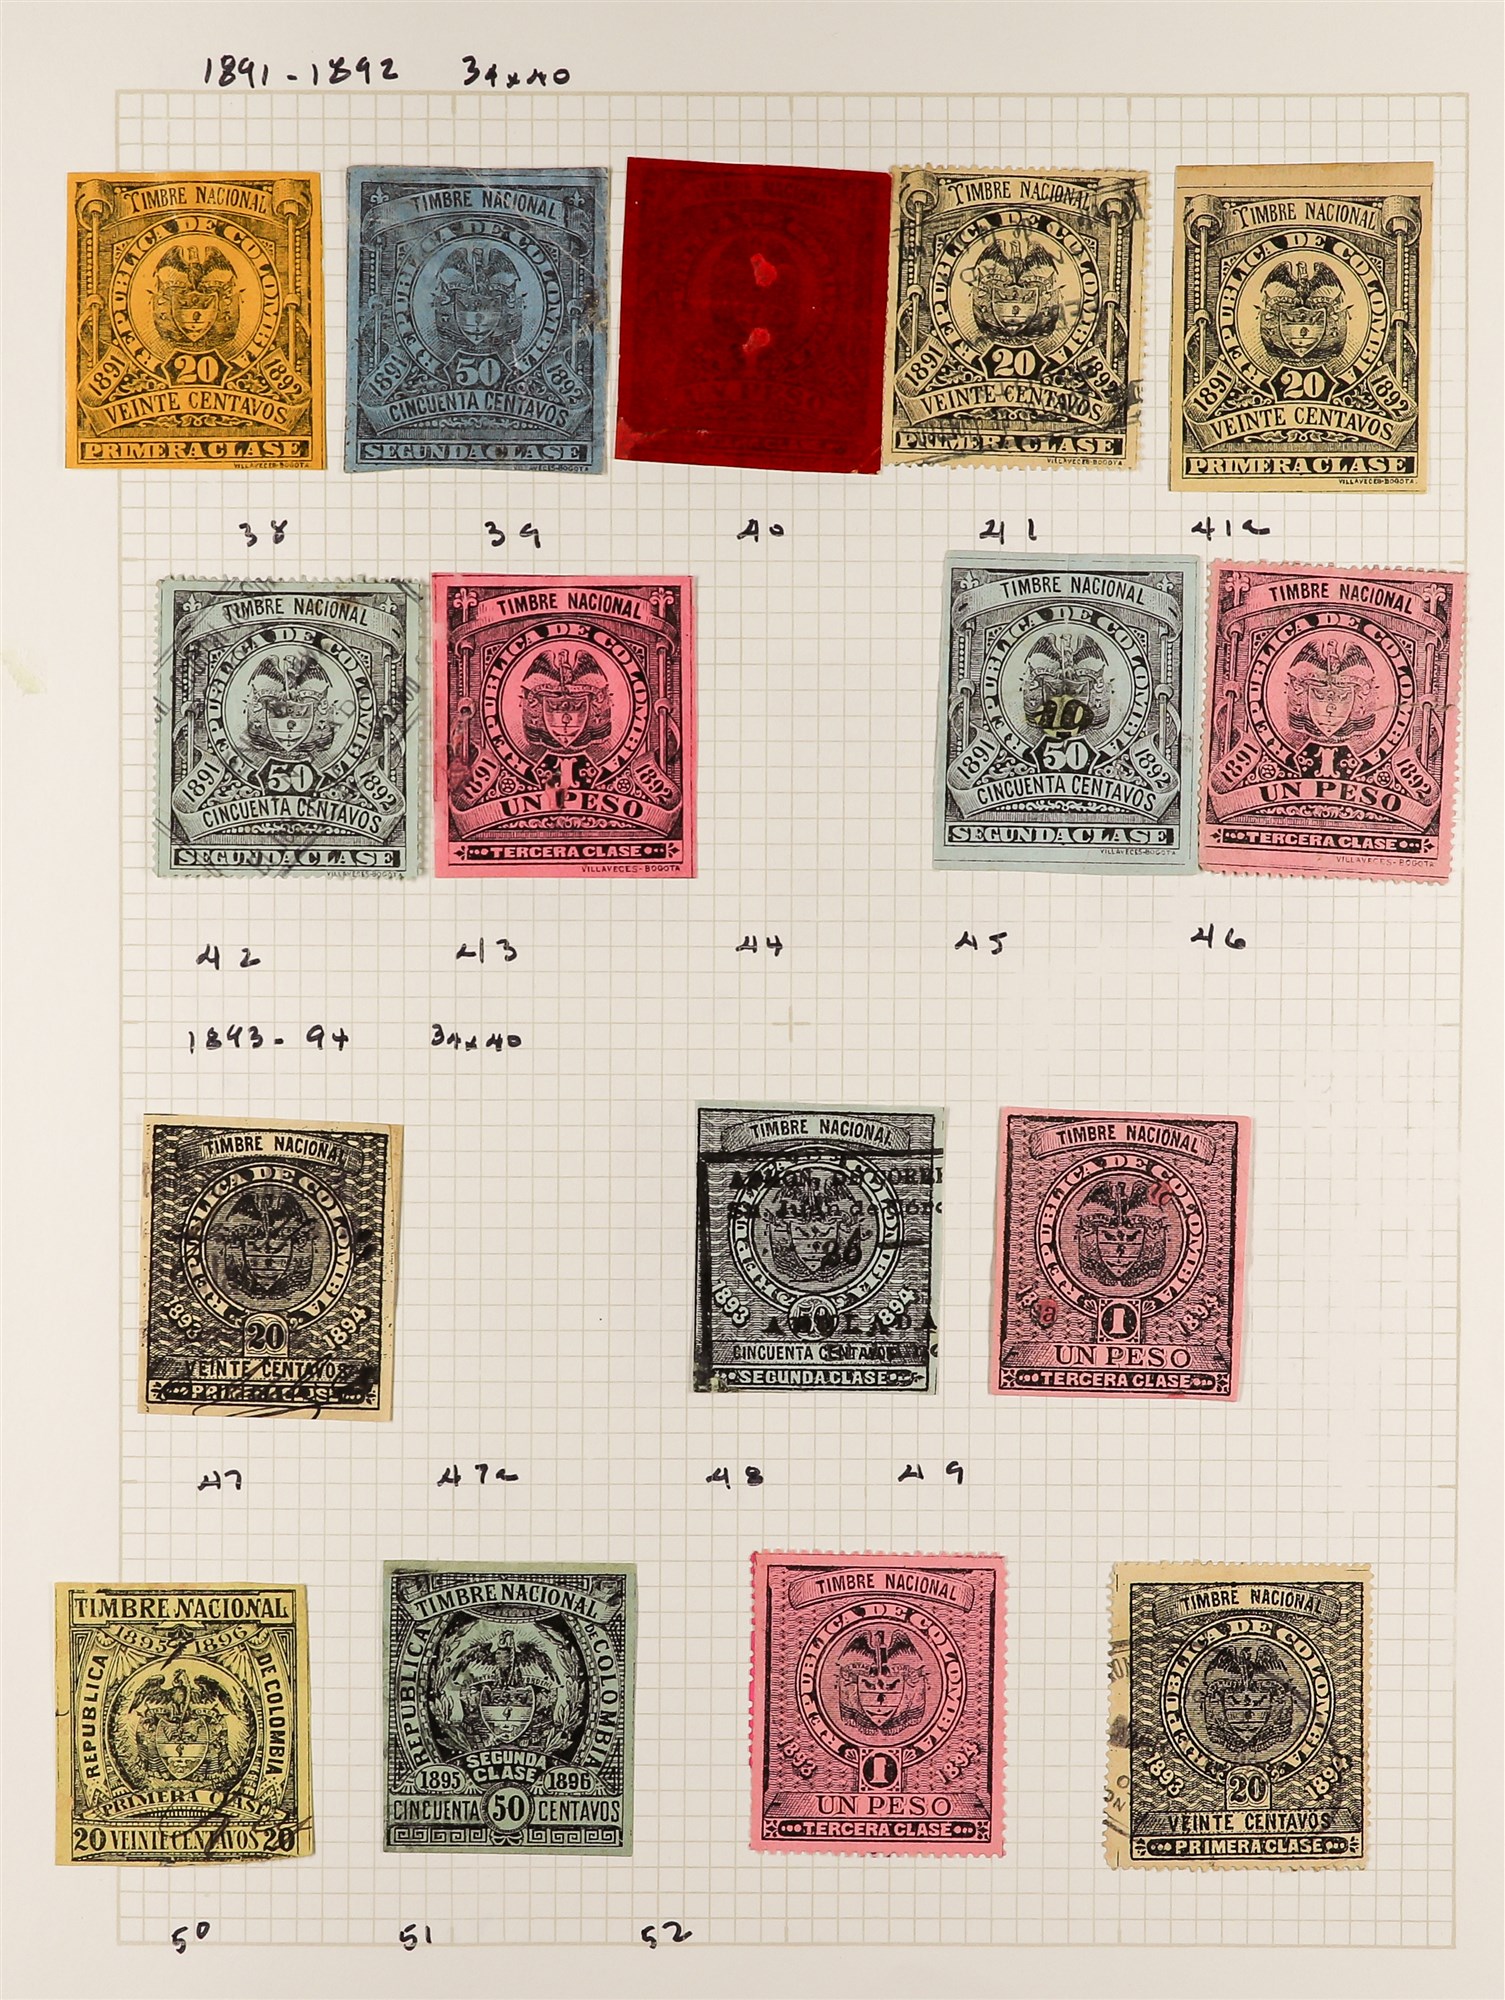 COLOMBIA REVENUE STAMPS COLLECTION largely 19th century issues on pages and in packets, incl. Timbre - Image 2 of 10